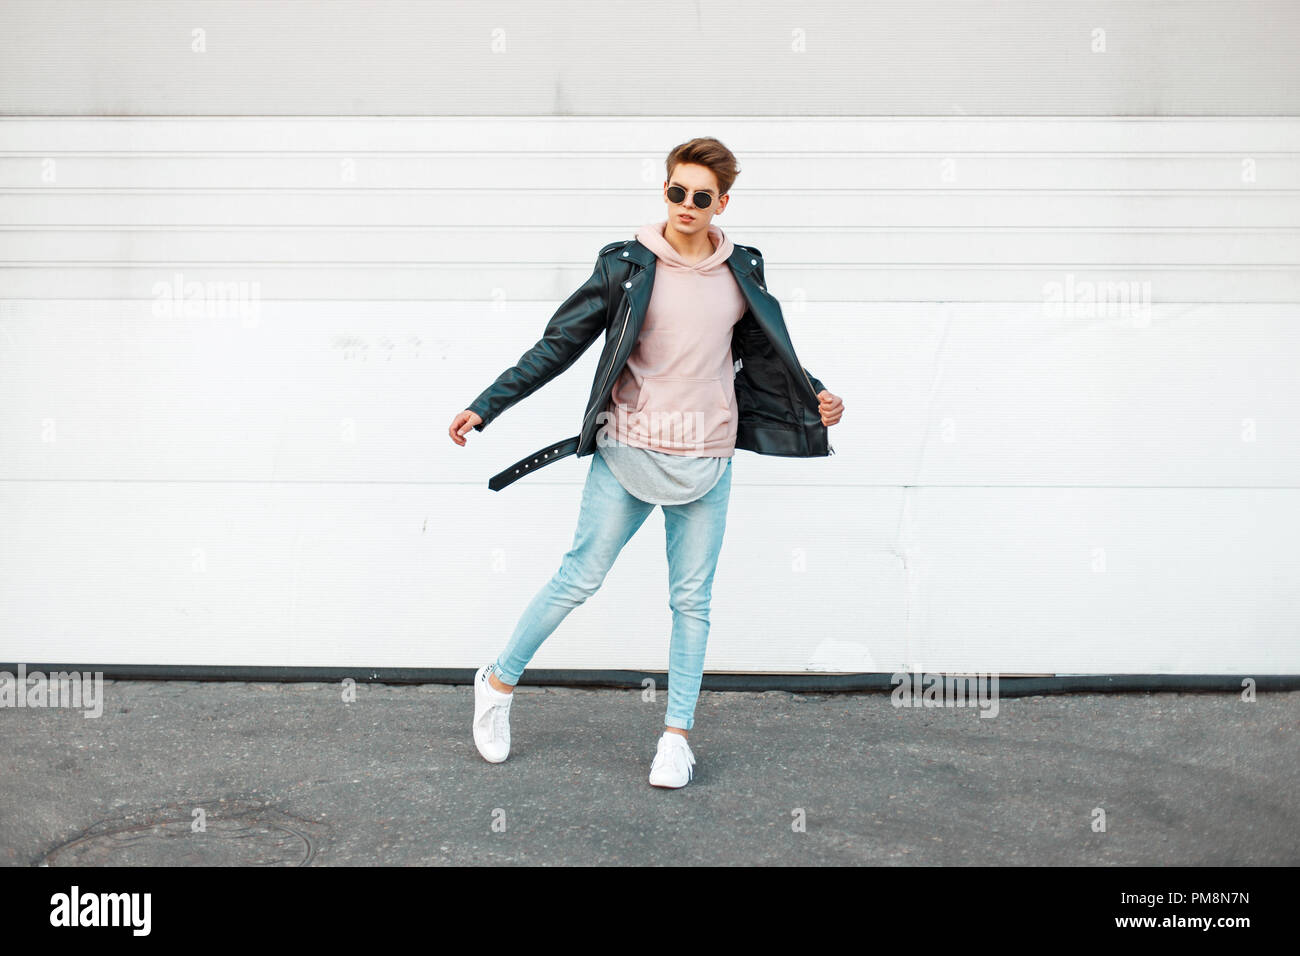 Handsome young fashionable man with sunglasses in a black leather jacket, a pink sweatshirt, blue brand jeans and white shoes in motion Stock Photo